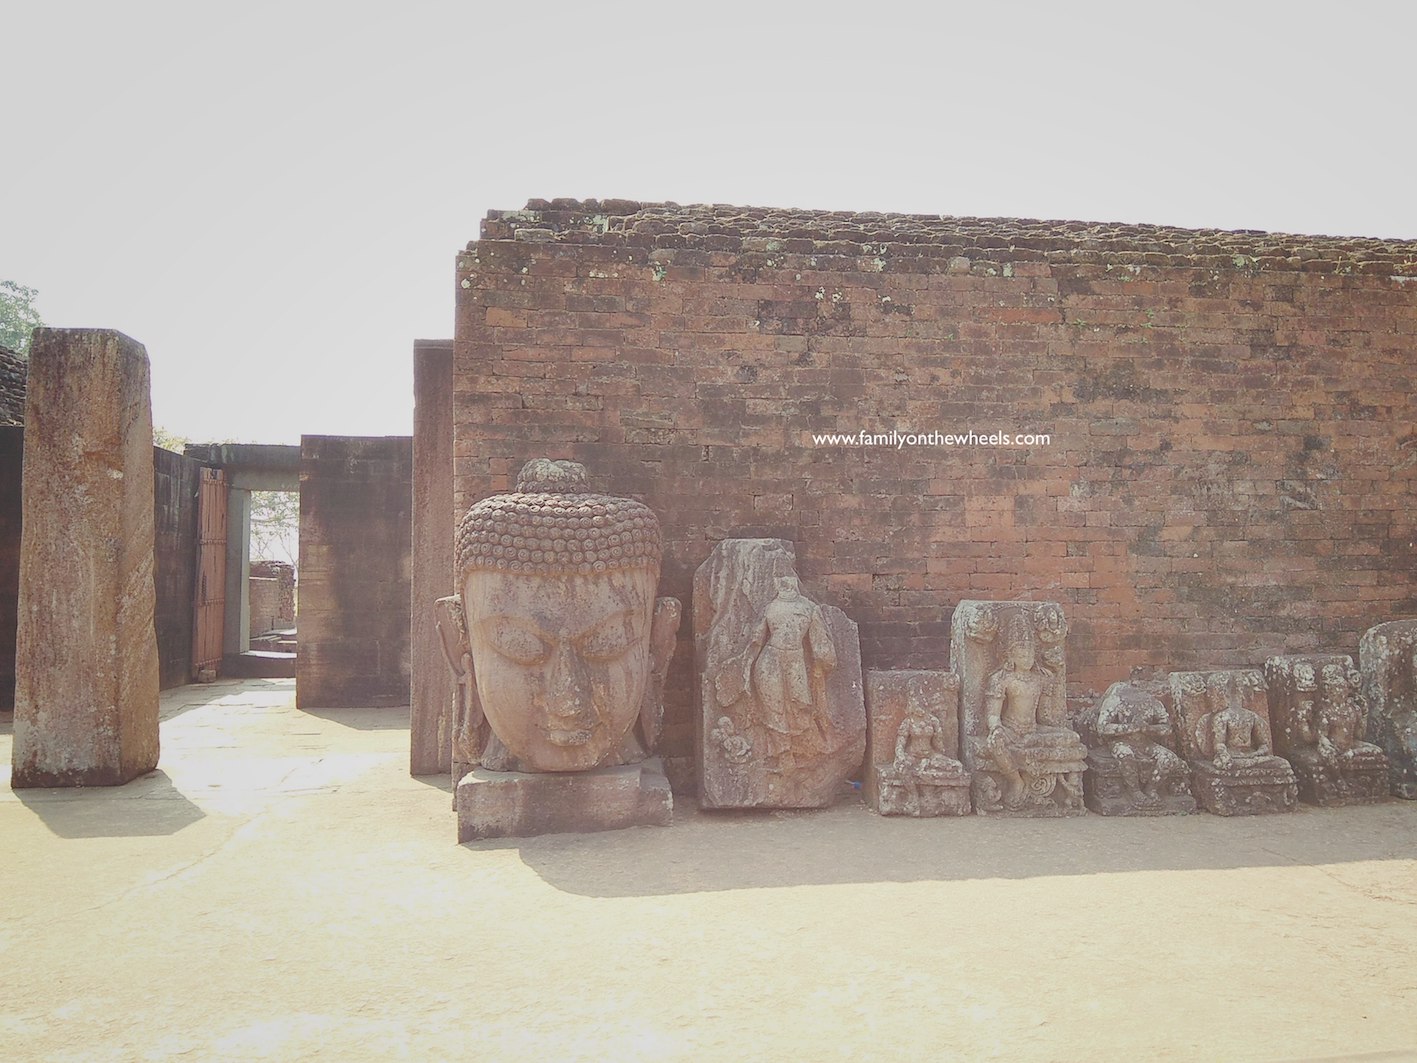 Its the #worldheritageday , let's get to know the important Buddhist heritage in Jajpur district of Odisha - ratnagiri, Udayagiri and Lalitgiri. COmmonly called as Buddhist Circuit, these heritages are must for tourists. world heritage day, April 18. #architecture #excavations #ASI #buddhist #monastery